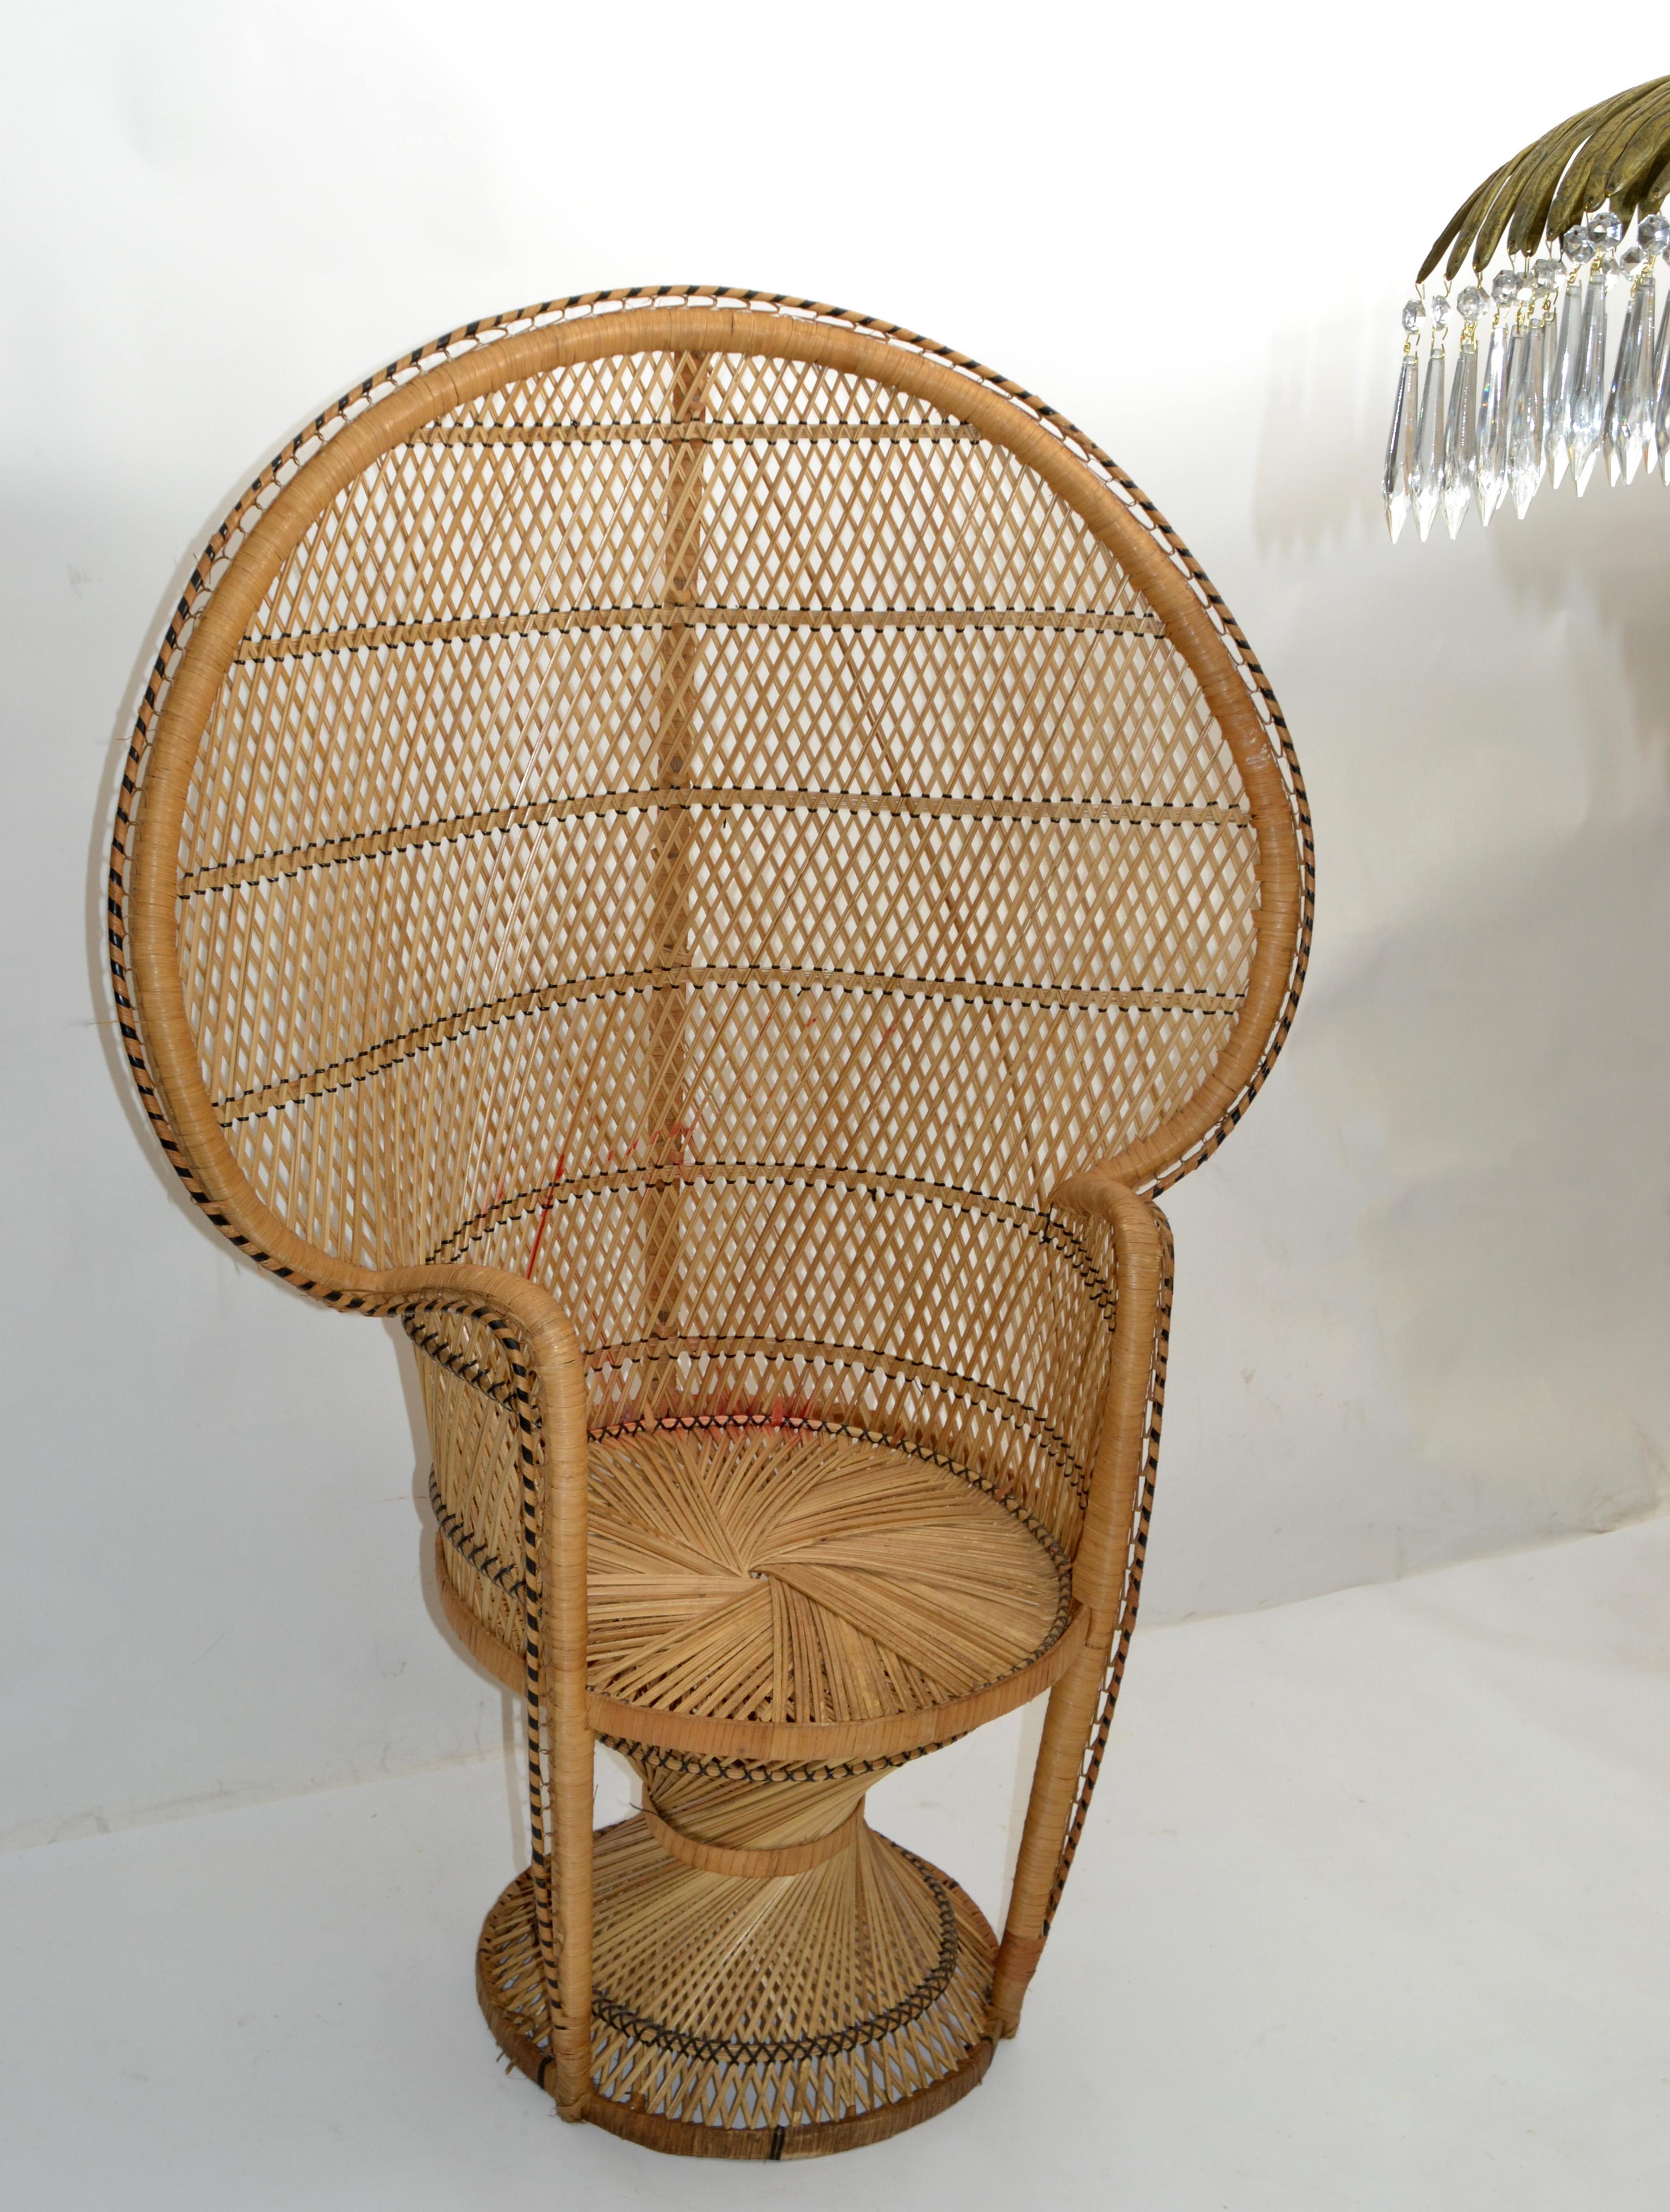 Stunning Boho Chic handwoven vintage Beige and black peacock chair from the 1970s.
Please note the details and different techniques in this chair. 
Made out of wicker, rattan and reed.
Great for indoor and outdoor use.
Measure: Arm height: 28